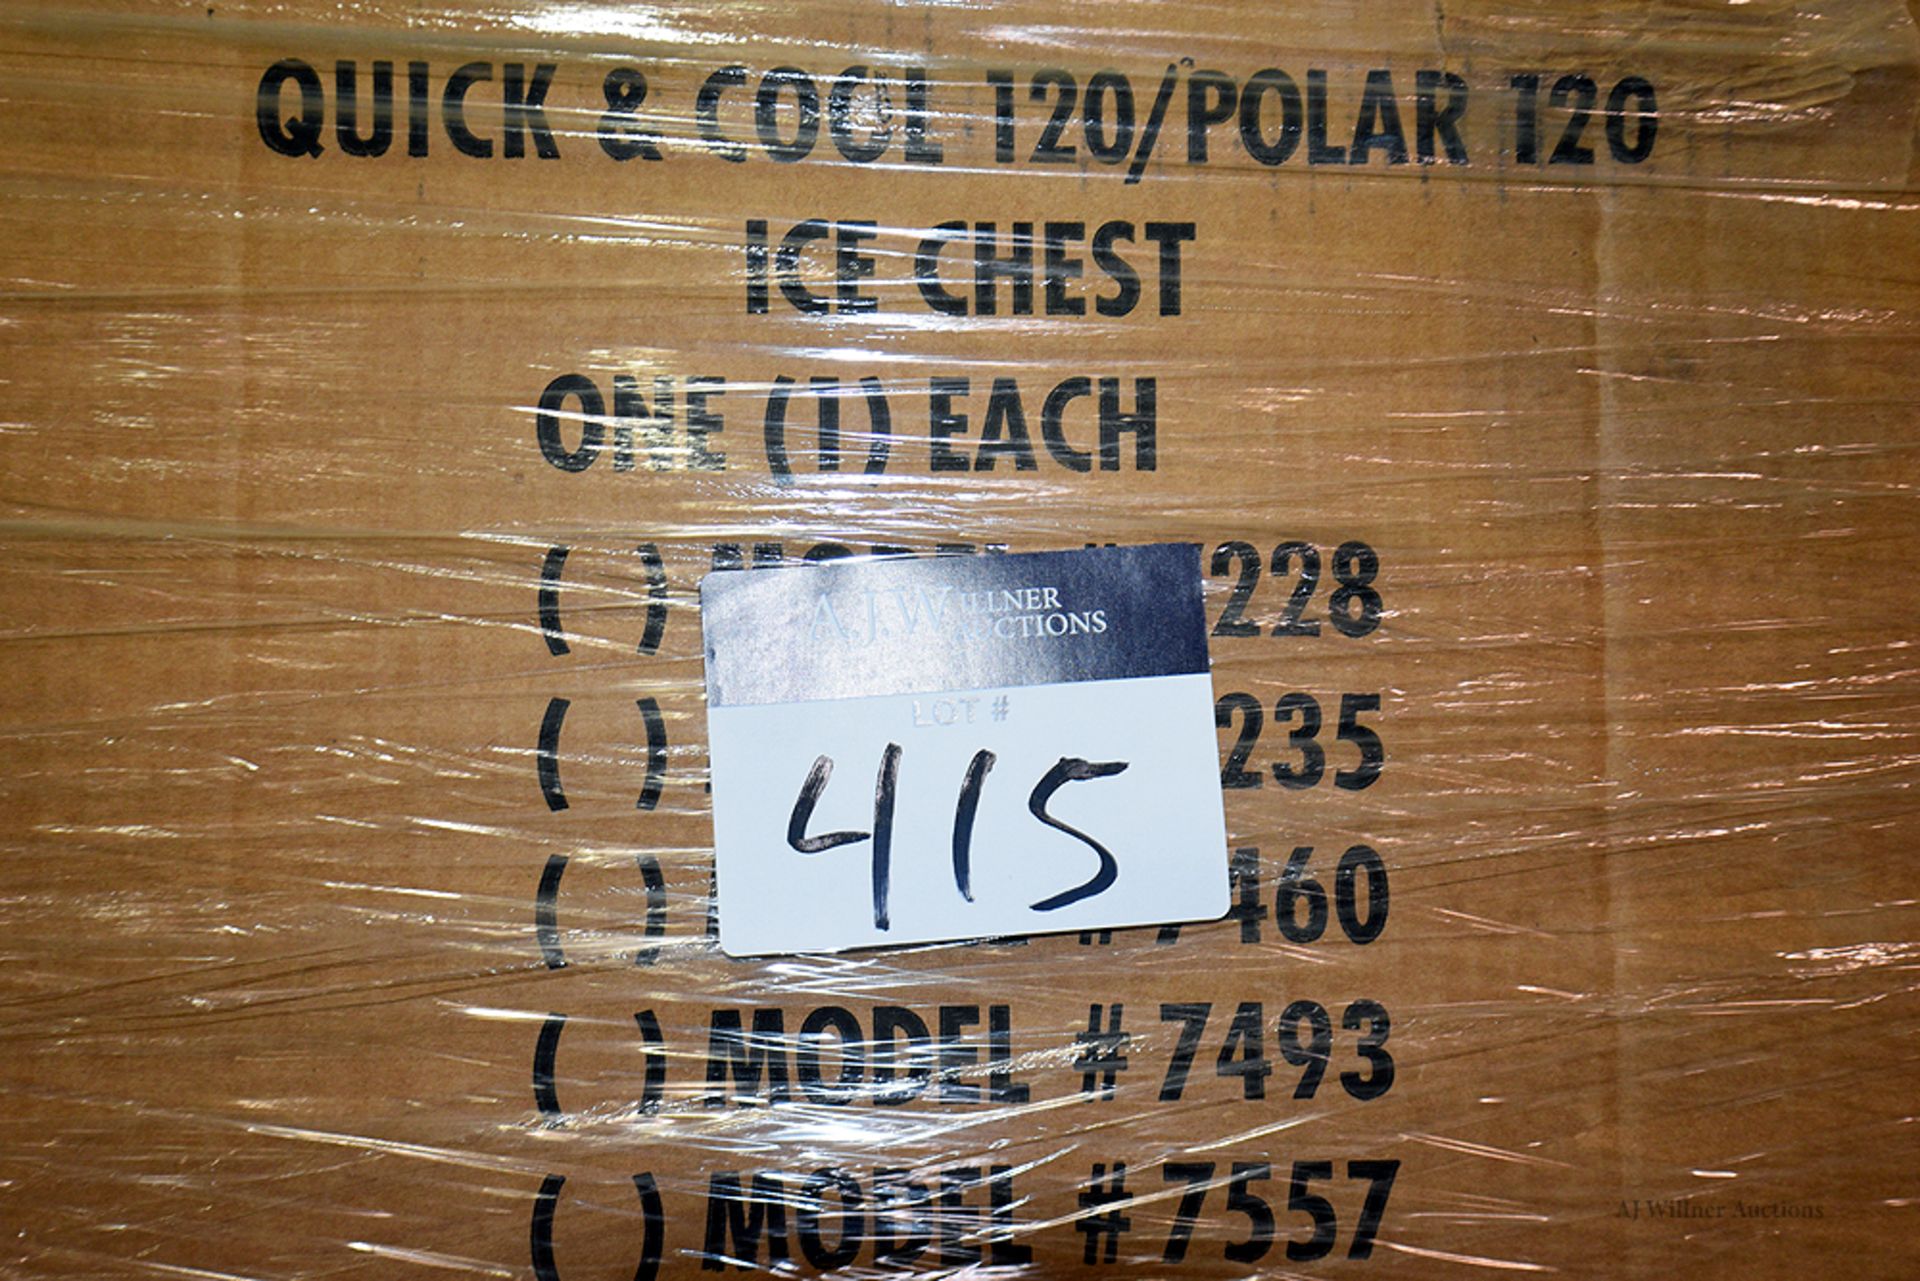 Quick & Cool 120/Polar 120 Ice Chests